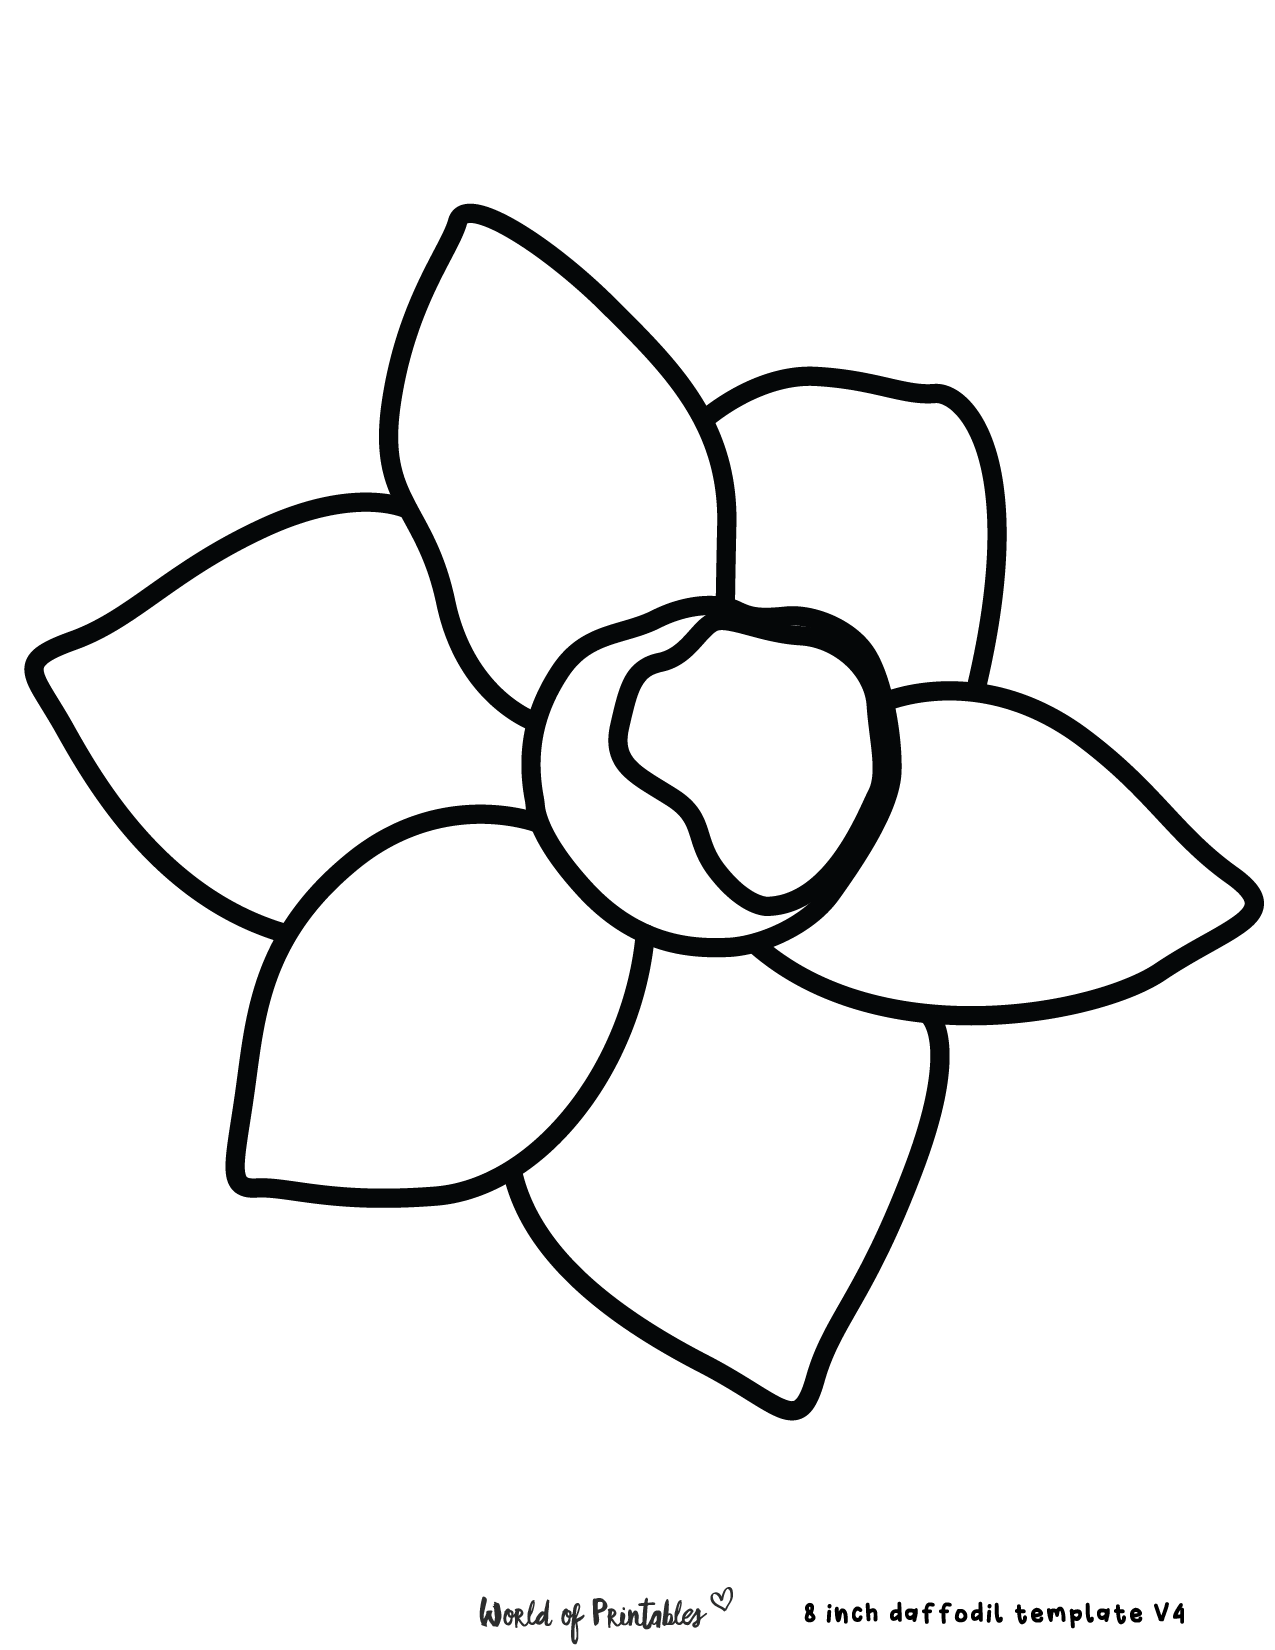 Daffodil templates tips for fun activities